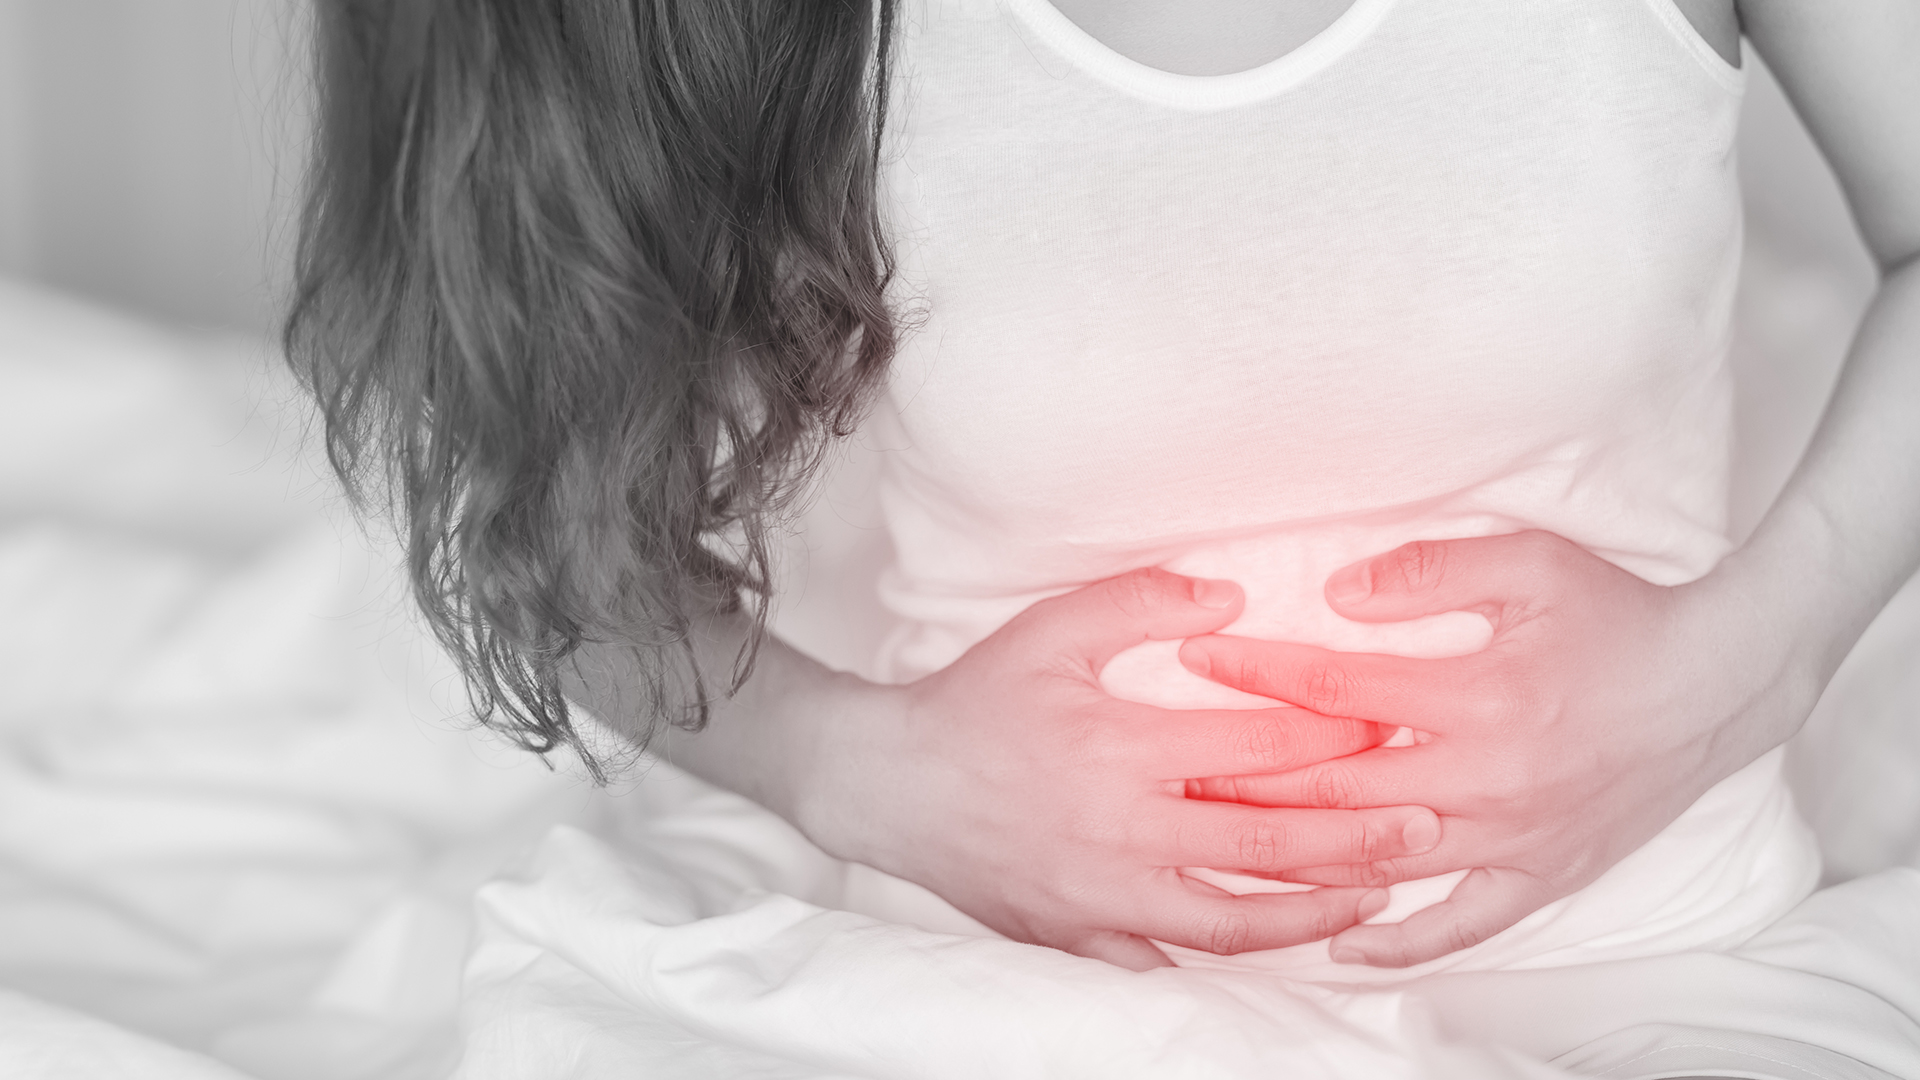 Woman with chronic constipation and should join a clinical trial